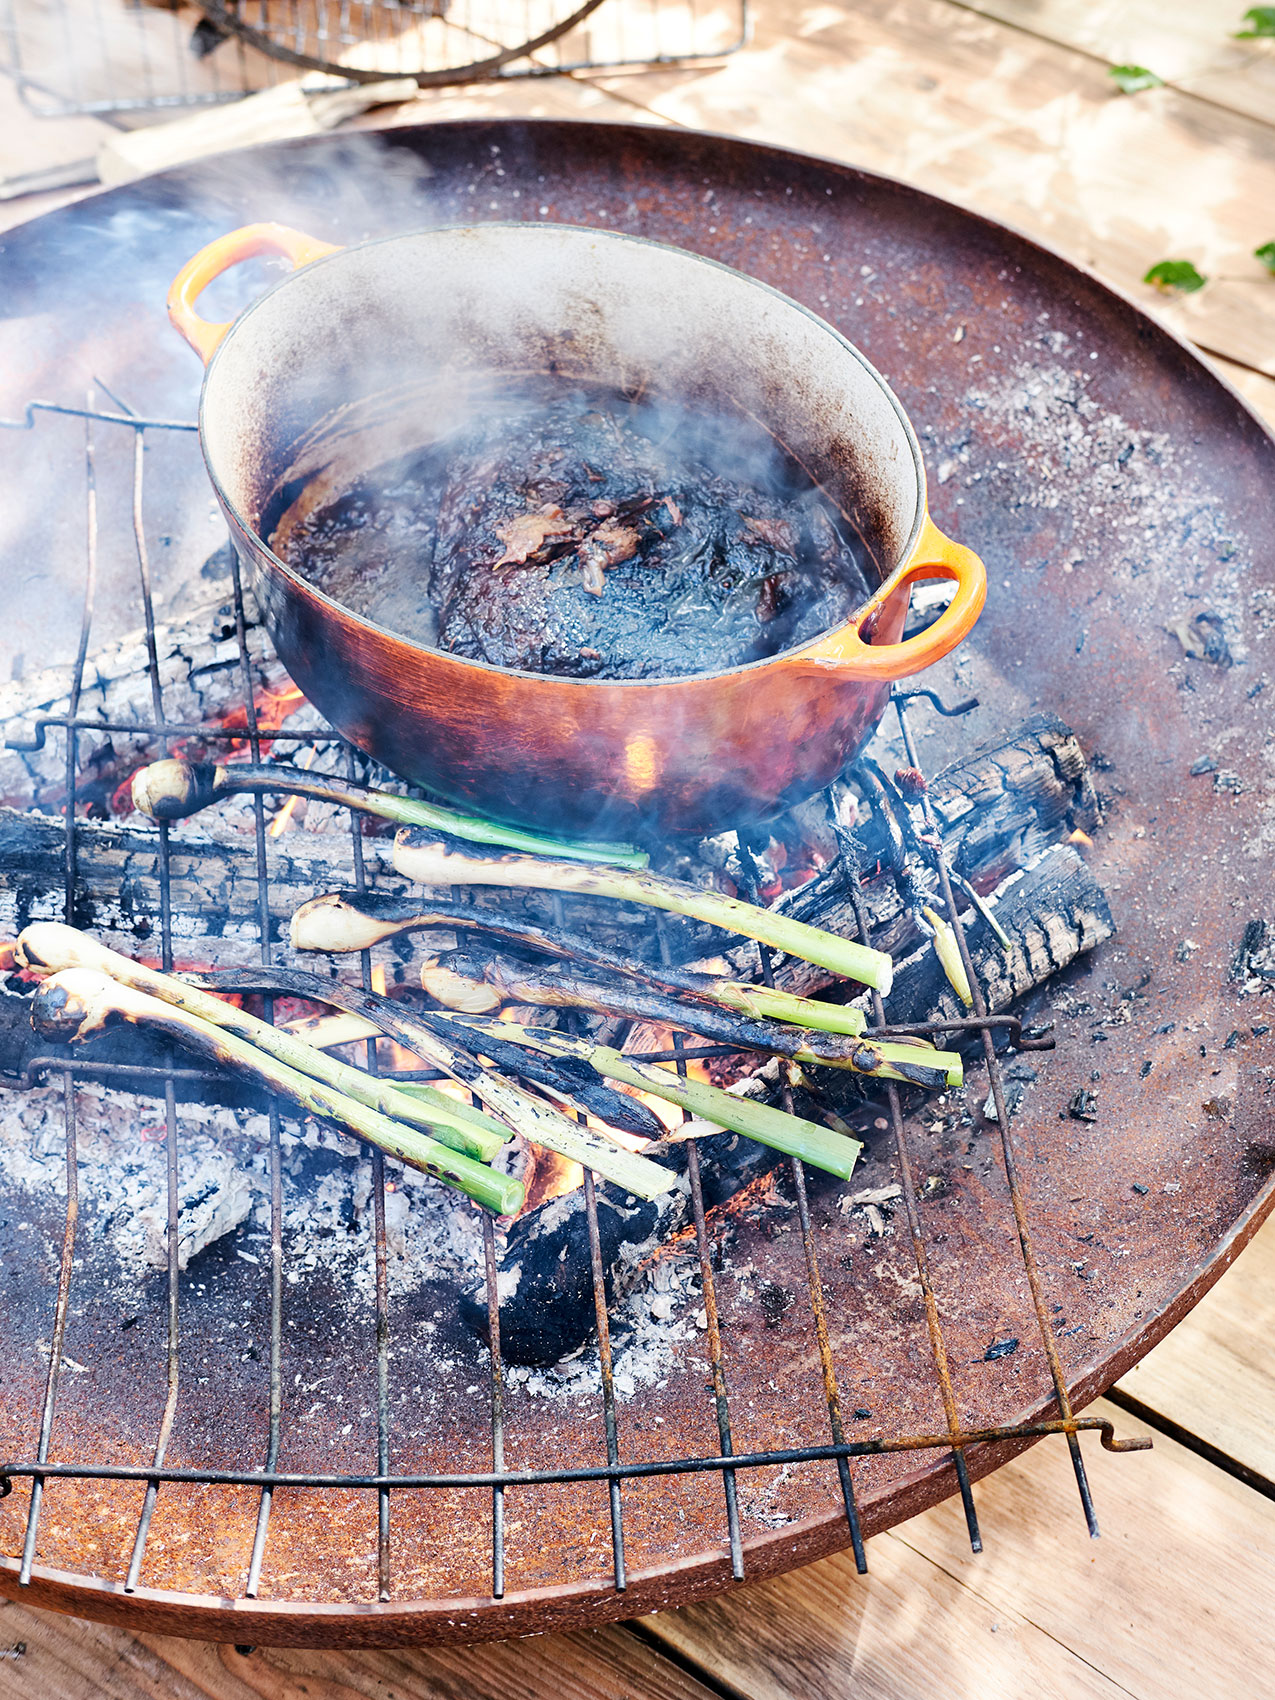 Stedsans in the Woods • Cooking Brisket on Fire Pit with Charred Wild Onions • Lifestyle & Editorial Food Photography